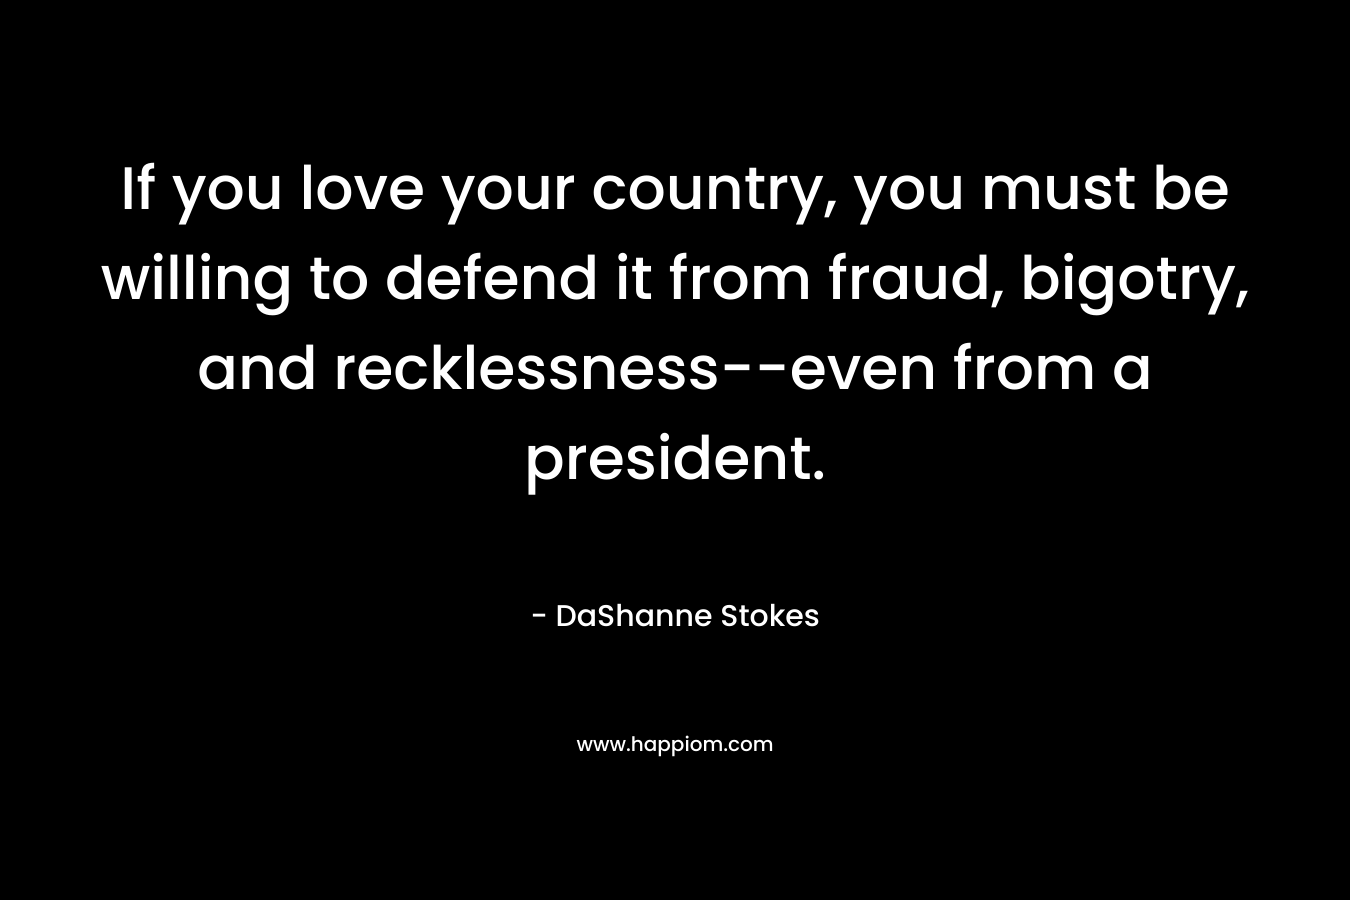 If you love your country, you must be willing to defend it from fraud, bigotry, and recklessness–even from a president. – DaShanne Stokes